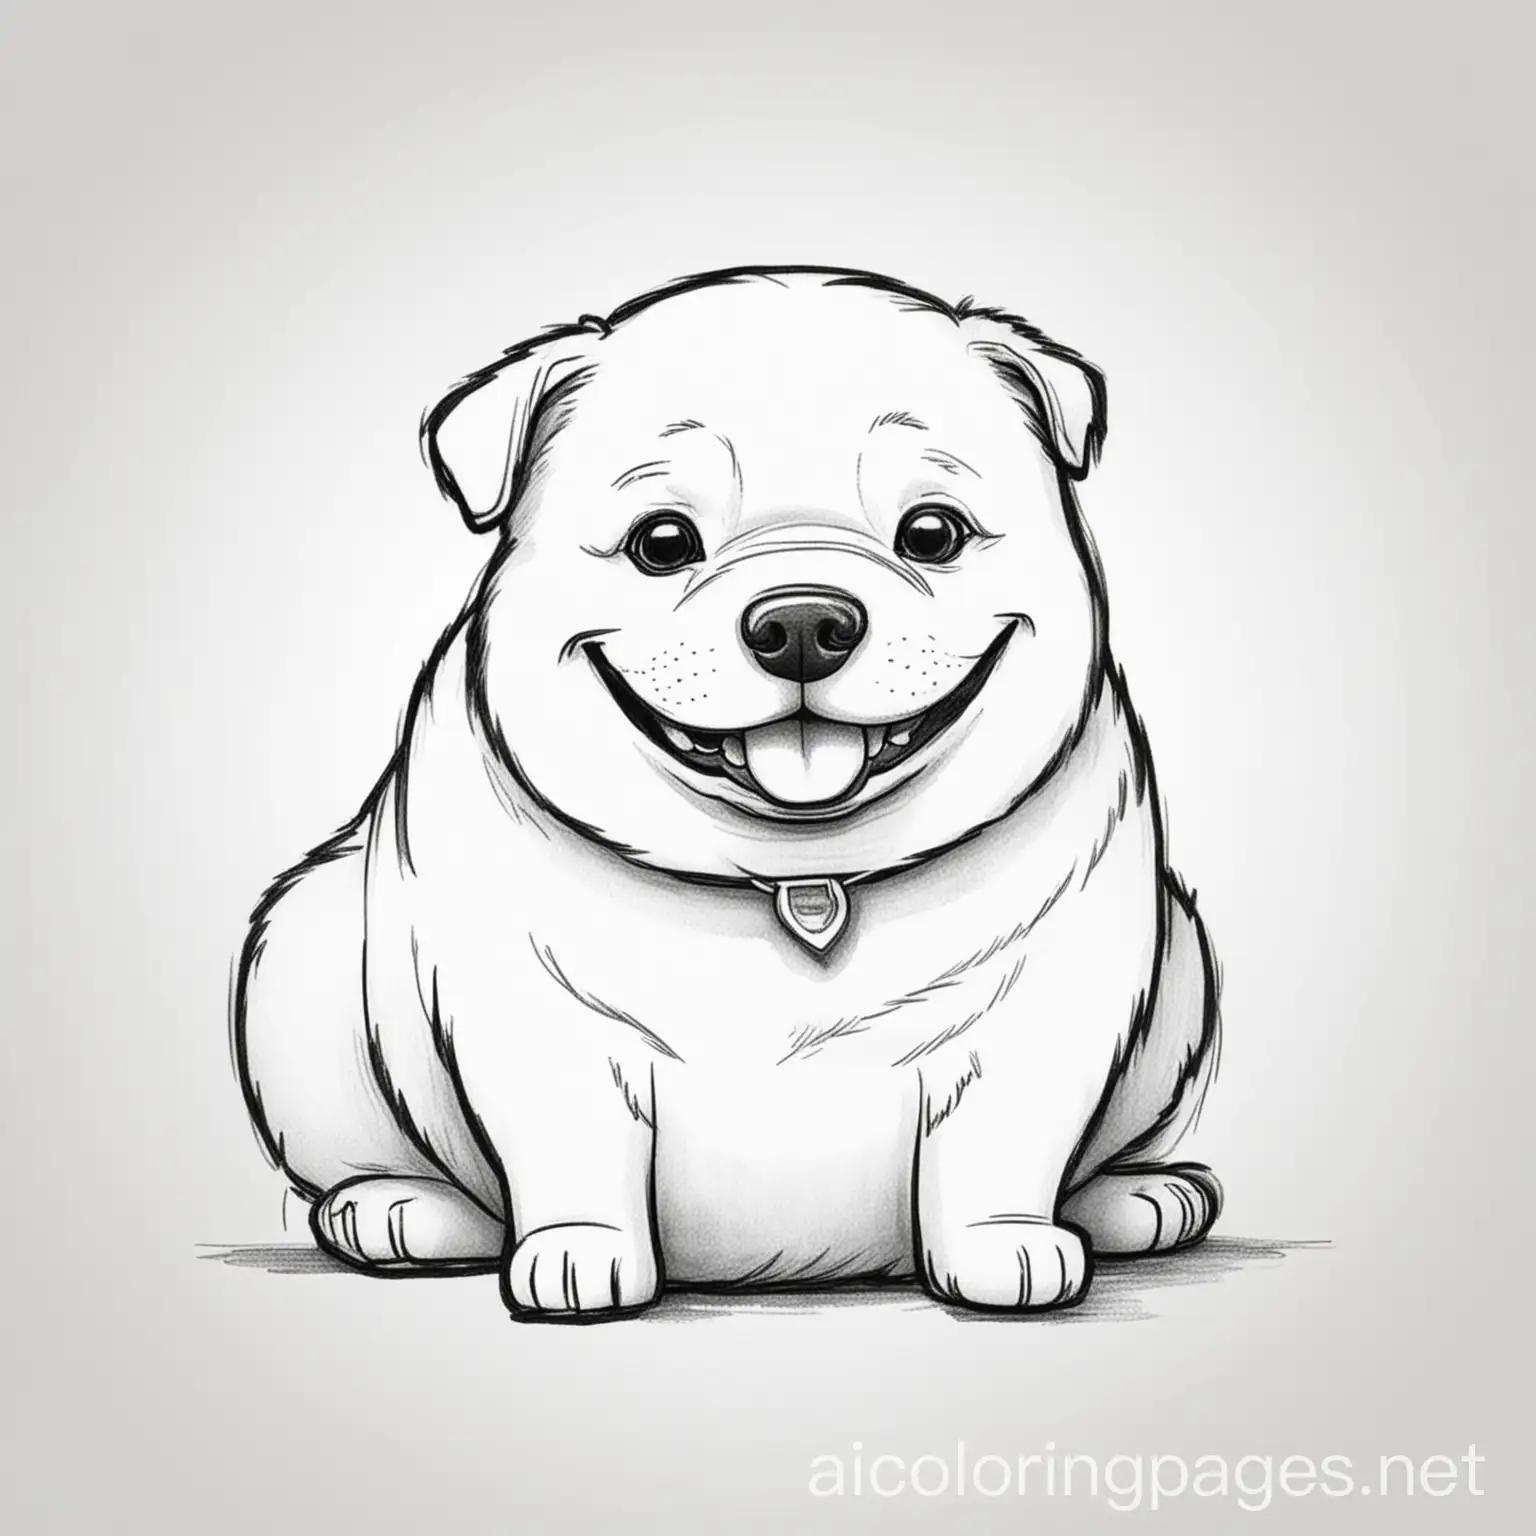 happy fat dog, Coloring Page, black and white, line art, white background, Simplicity, Ample White Space. The background of the coloring page is plain white to make it easy for young children to color within the lines. The outlines of all the subjects are easy to distinguish, making it simple for kids to color without too much difficulty